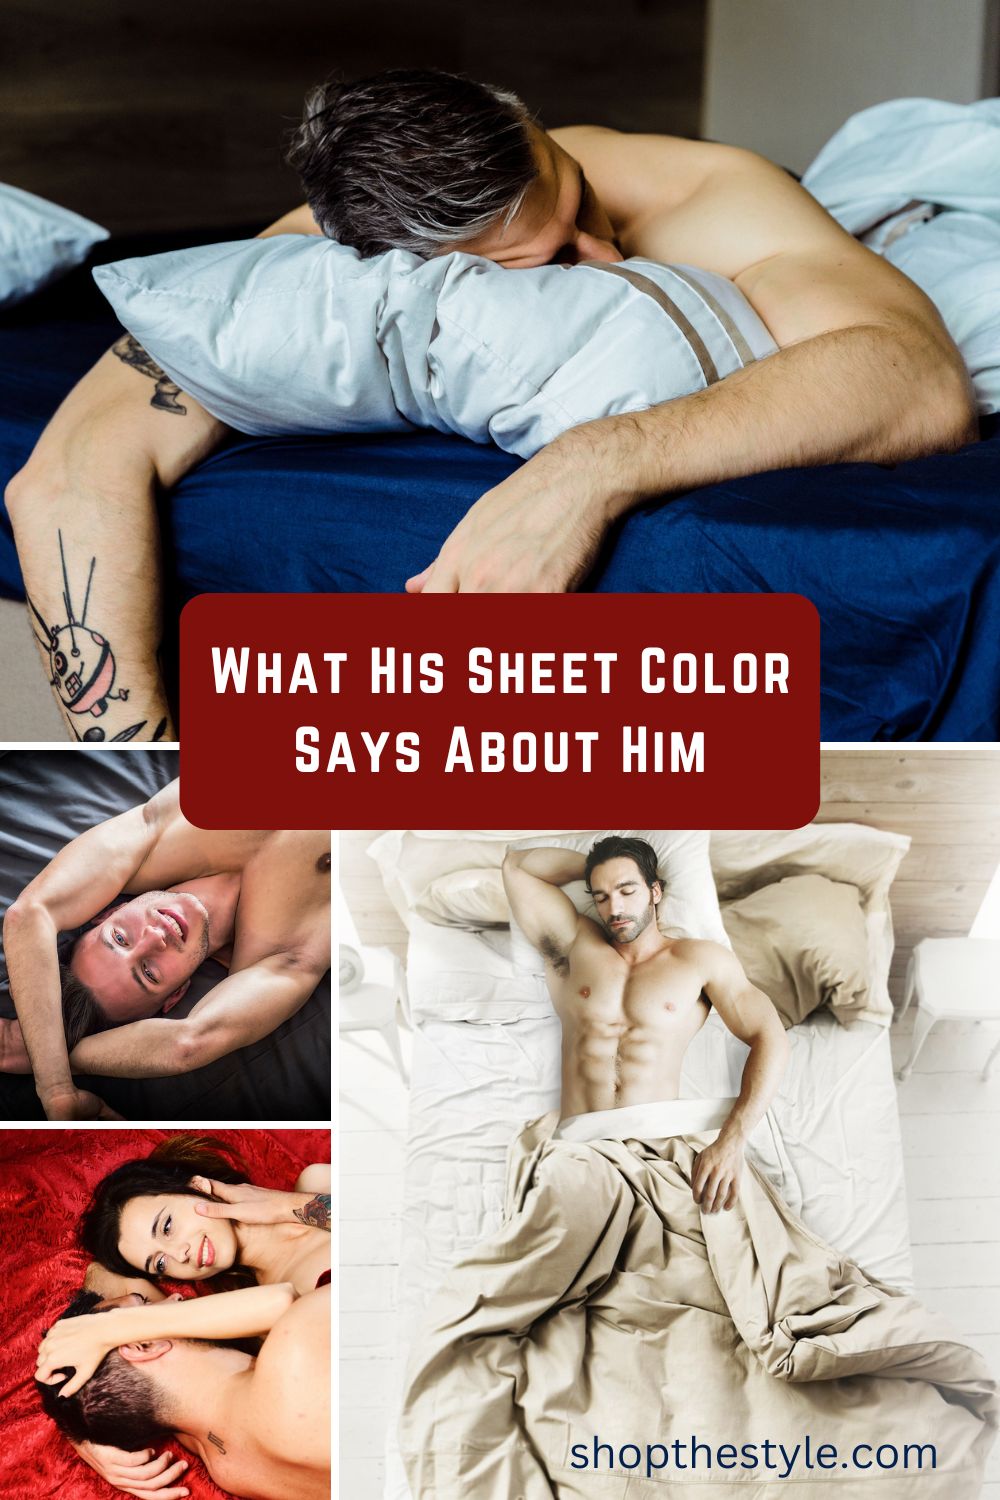 What His Sheet Color Says About Him